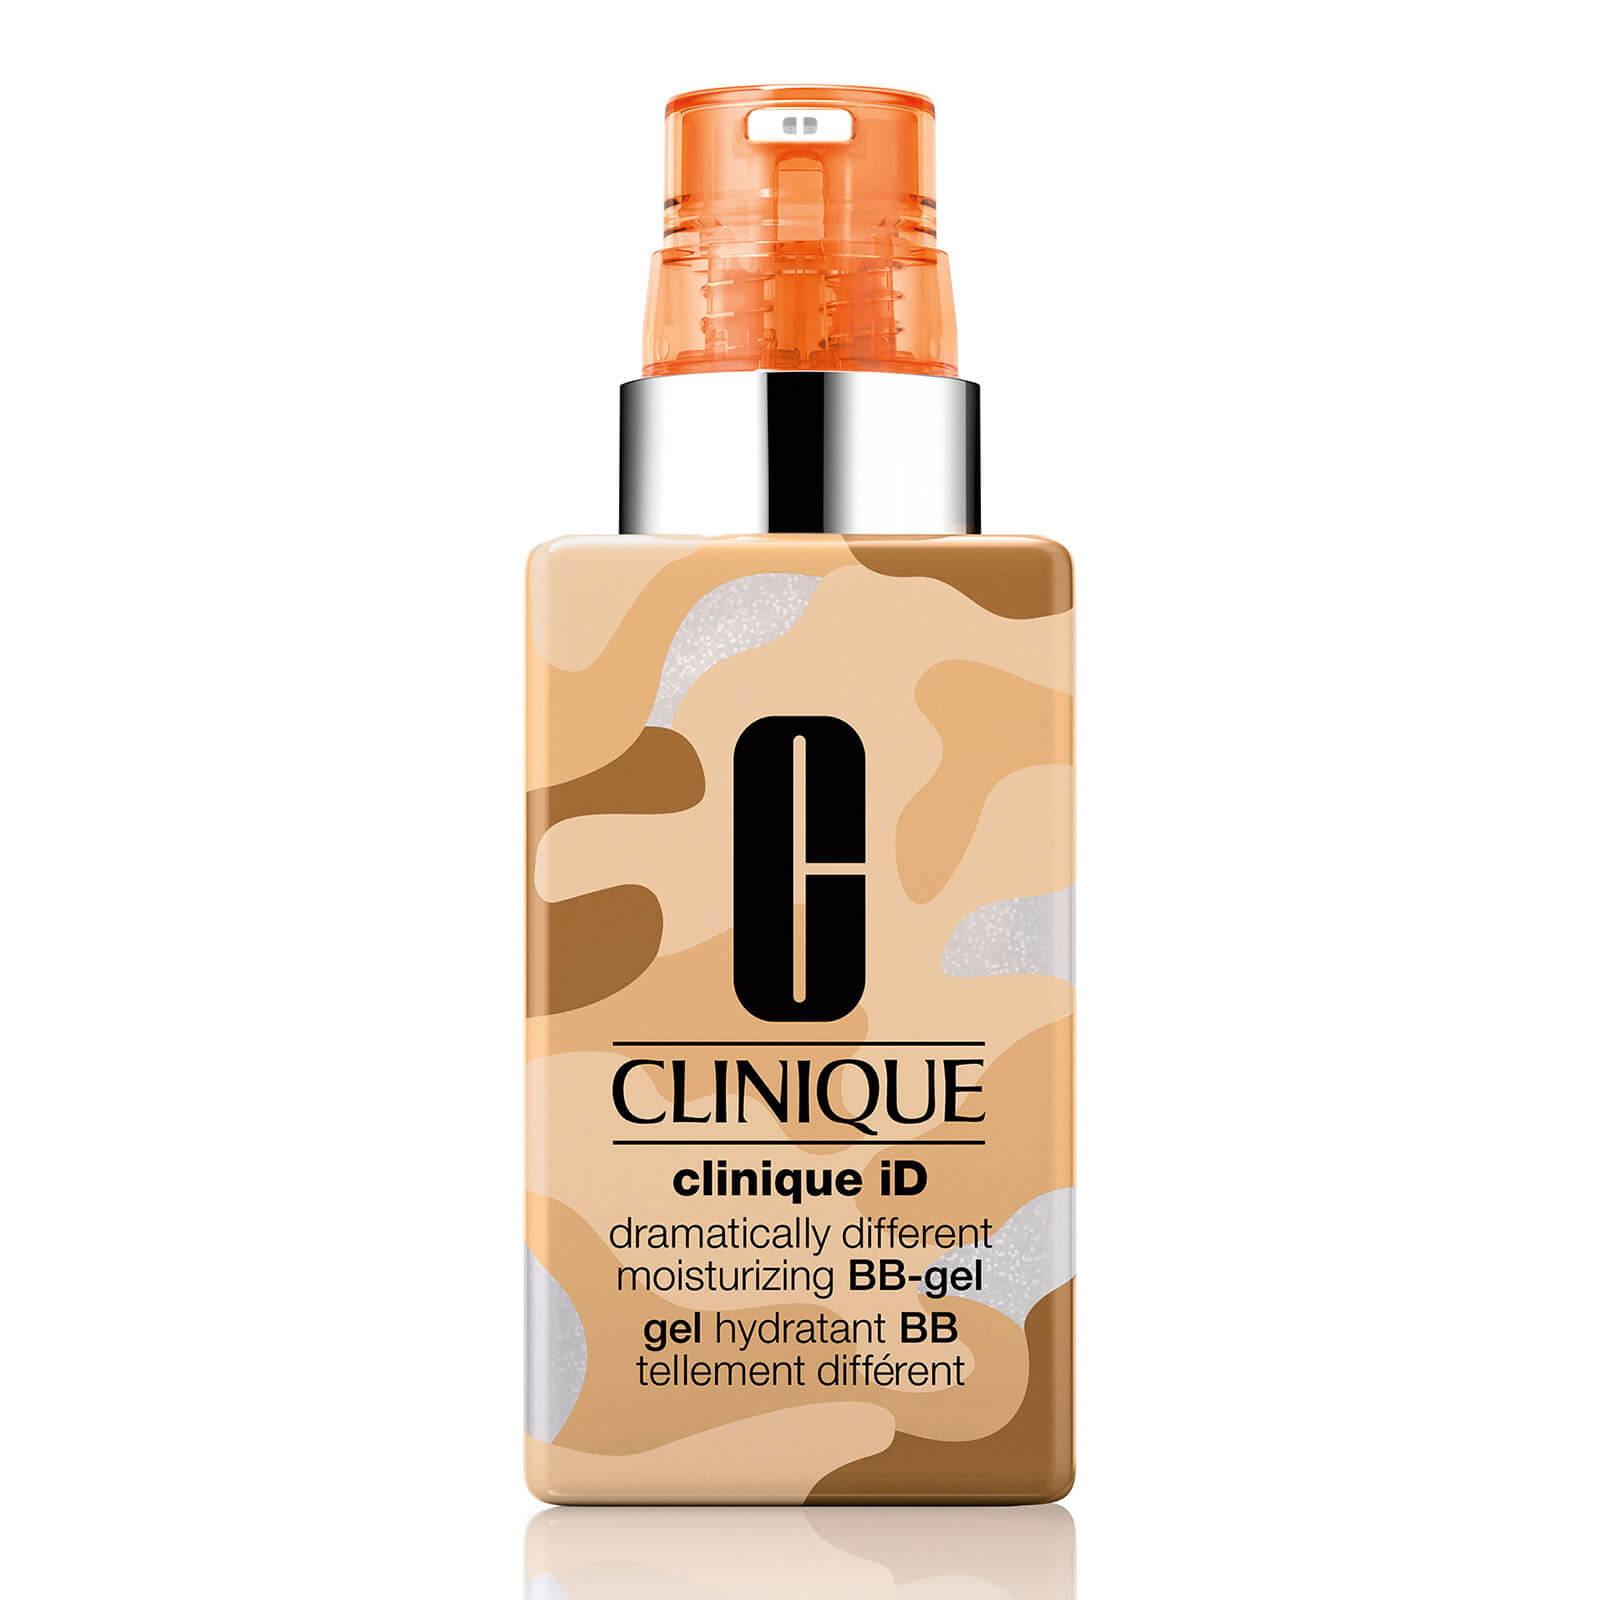 Clinique iD Dramatically Different Moisturizing BB-Gel and Active Cartridge Concentrato for Fatigue